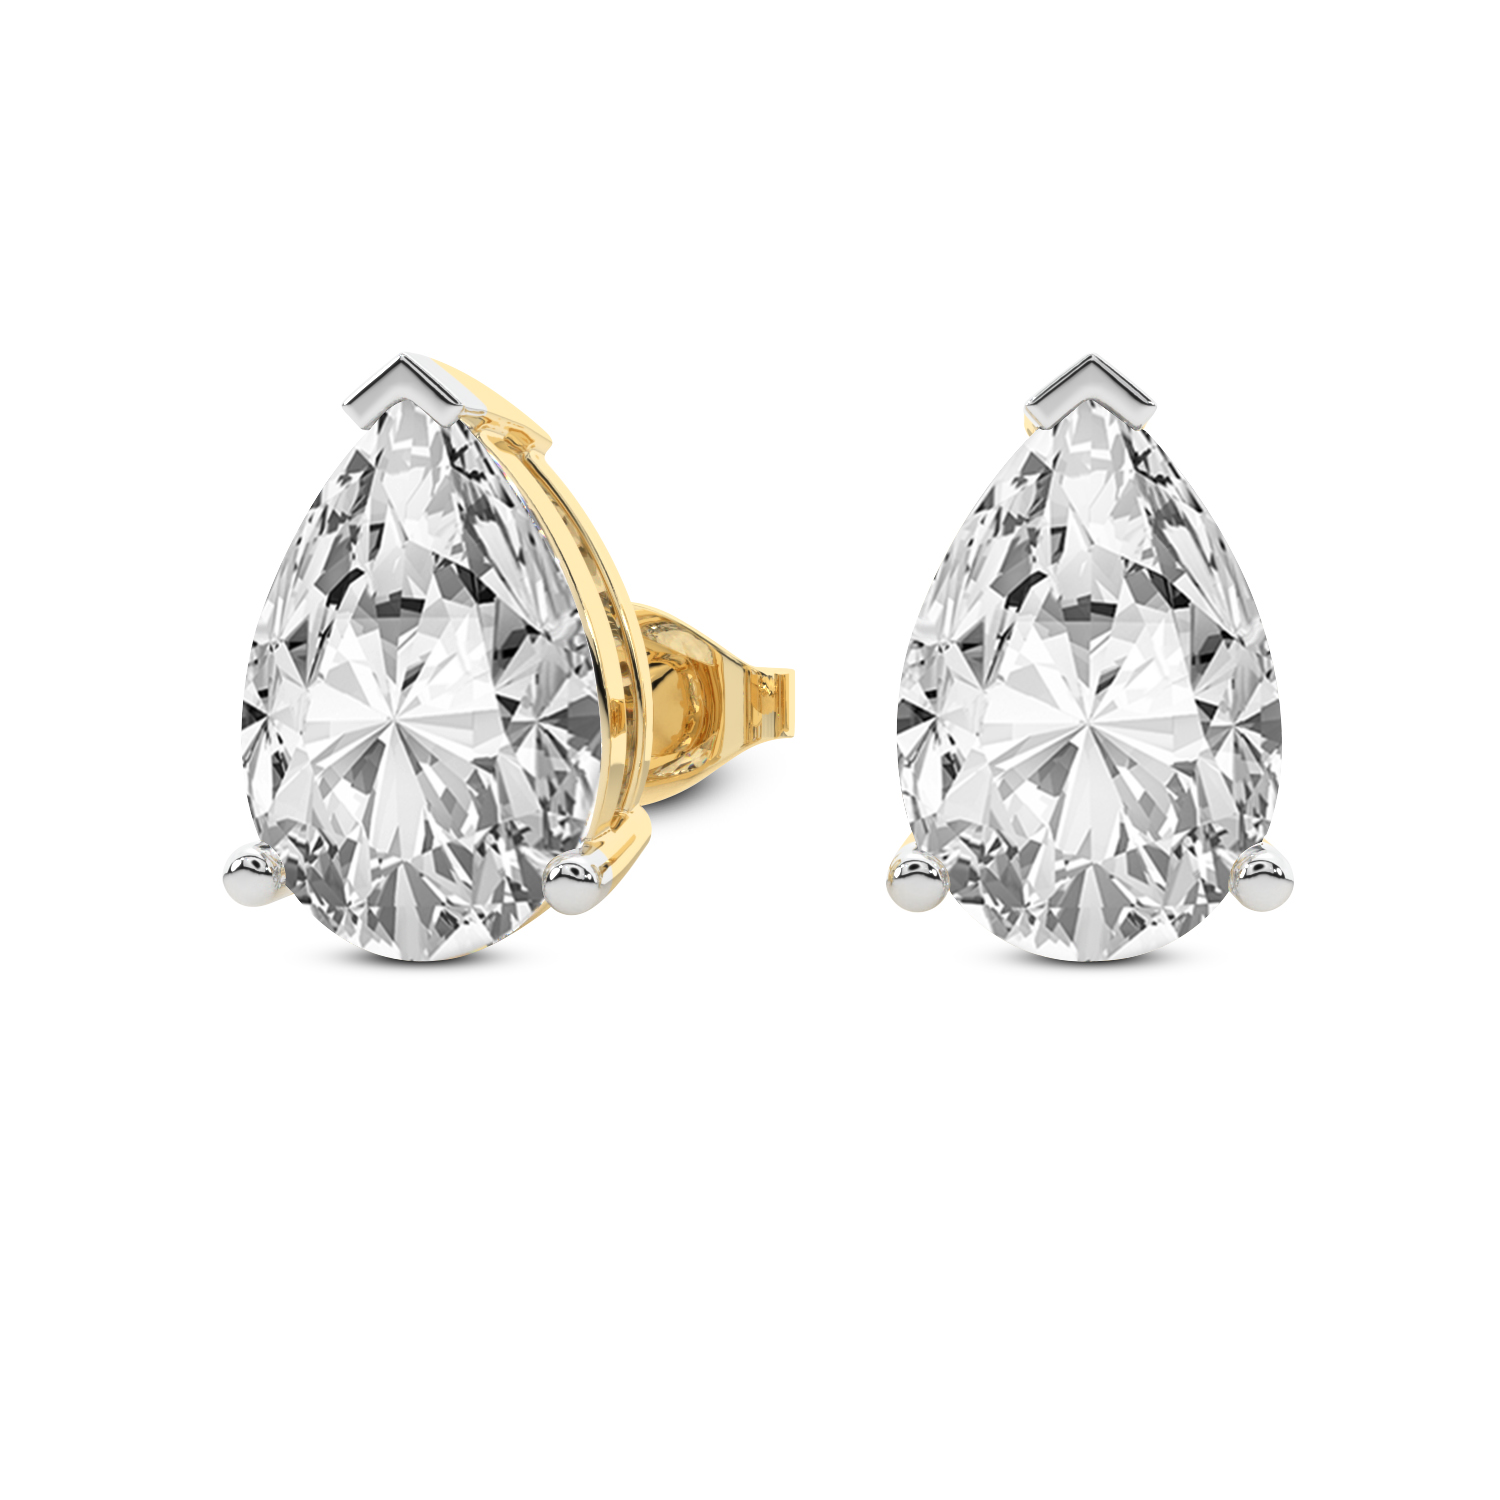 3 Prong Pear Lab Diamond Stud Earrings yellow gold earring, small right view